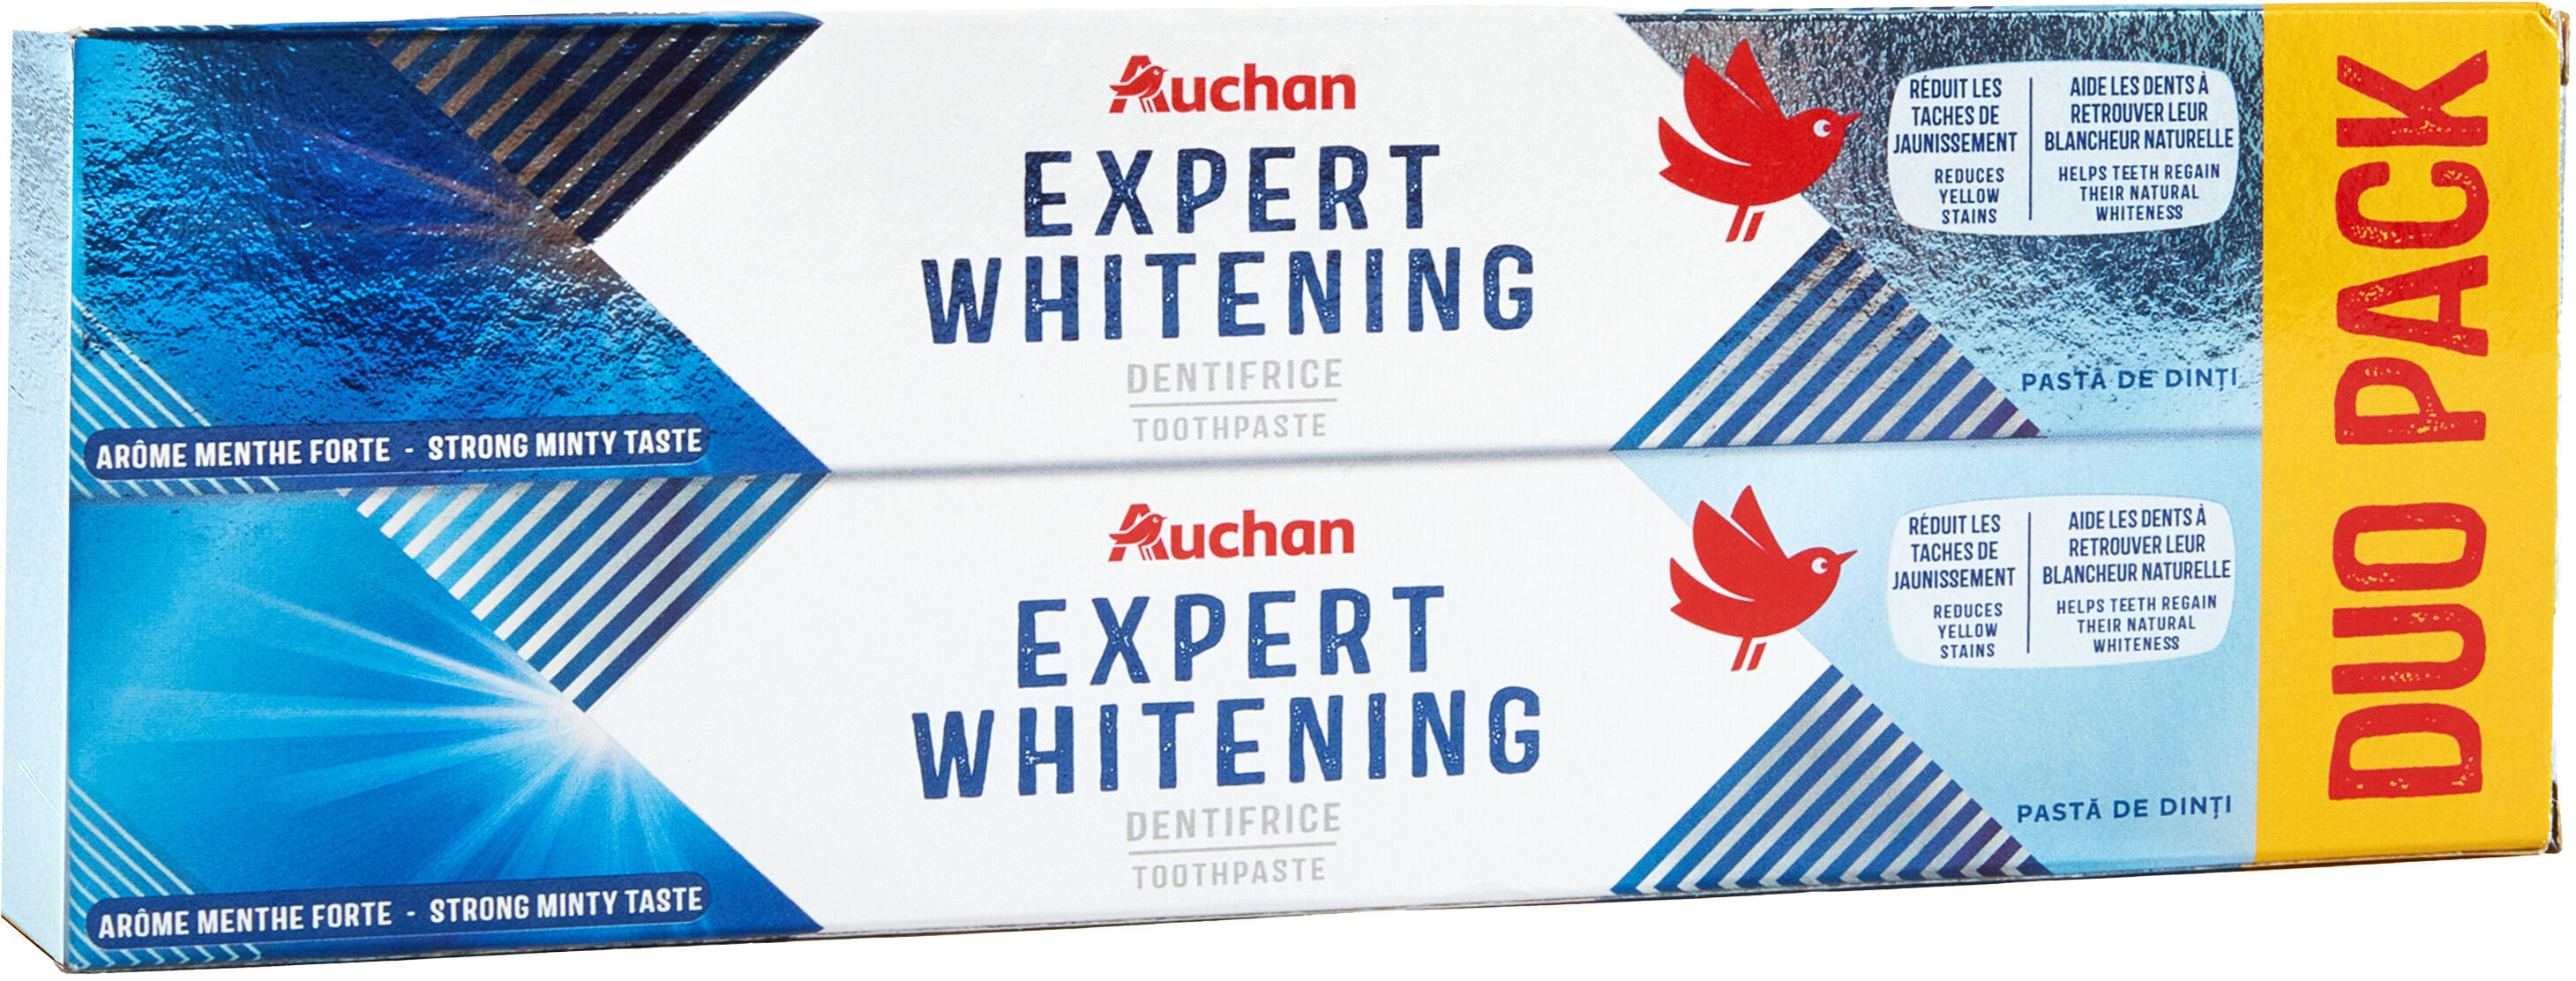 Dentifrice expert blancheur lot x2 - Tuote - fr